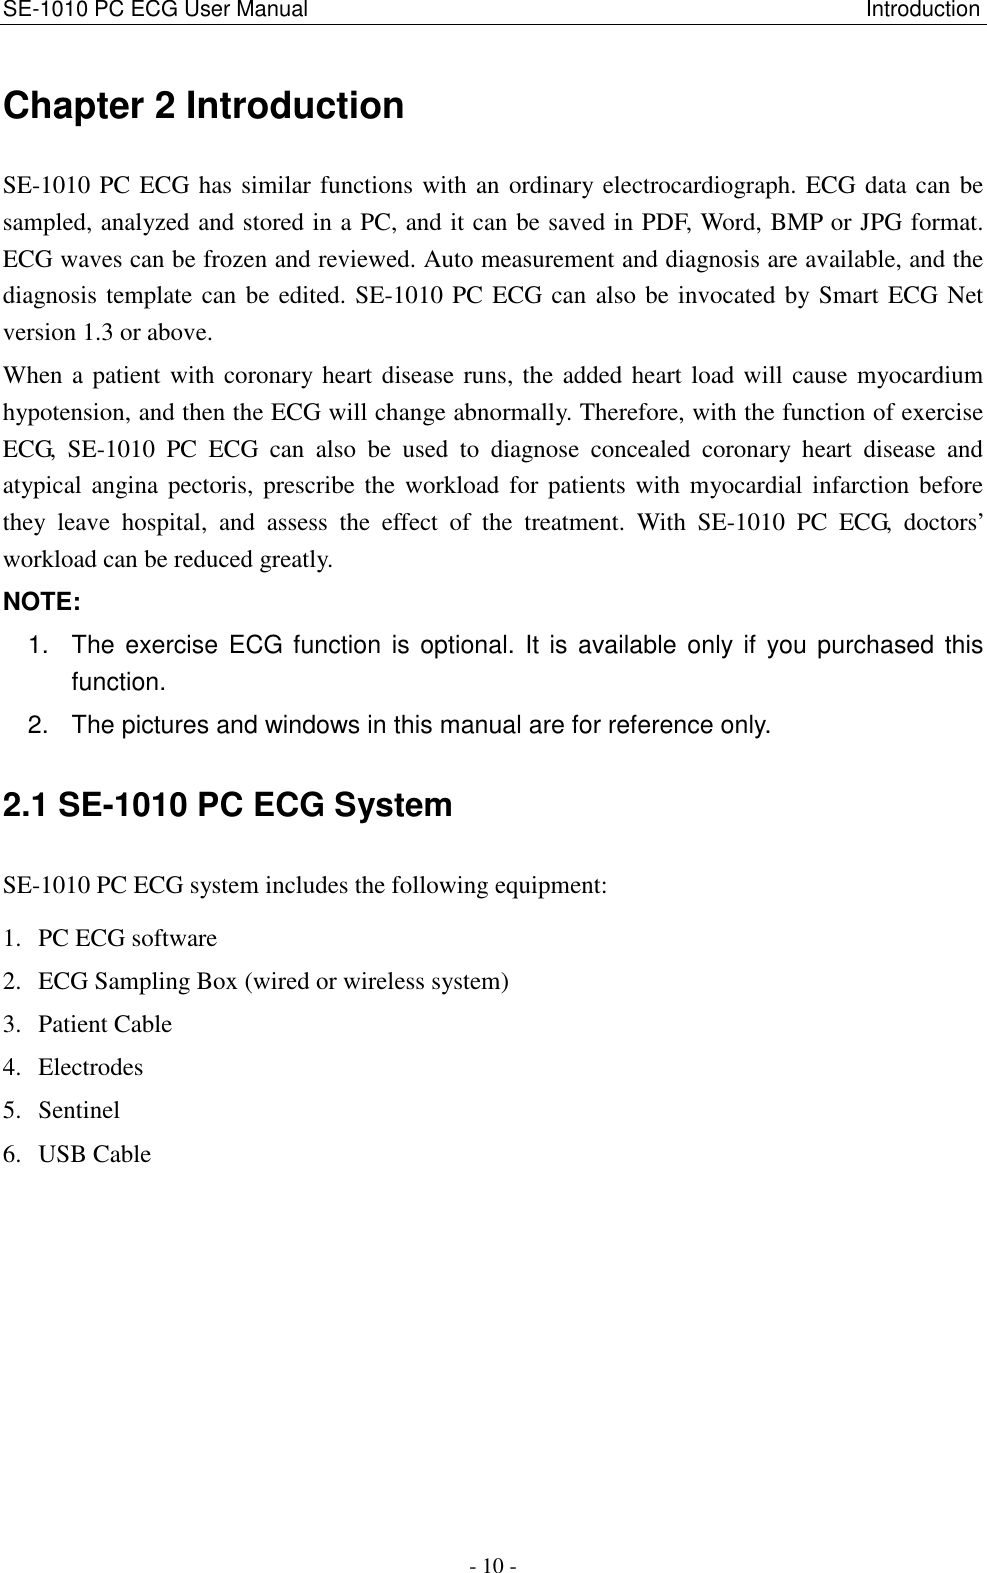 SE-1010 PC ECG User Manual                                                                                                      Introduction - 10 - Chapter 2 Introduction SE-1010 PC ECG has similar functions with an ordinary electrocardiograph. ECG data can be sampled, analyzed and stored in a PC, and it can be saved in PDF, Word, BMP or JPG format. ECG waves can be frozen and reviewed. Auto measurement and diagnosis are available, and the diagnosis template can be edited. SE-1010 PC ECG can also be invocated by Smart ECG Net version 1.3 or above. When a patient with coronary heart disease runs, the added heart load will cause myocardium hypotension, and then the ECG will change abnormally. Therefore, with the function of exercise ECG,  SE-1010  PC  ECG  can  also  be  used  to  diagnose  concealed  coronary  heart  disease  and atypical angina pectoris, prescribe the workload for patients with myocardial infarction before they  leave  hospital,  and  assess  the  effect  of  the  treatment.  With  SE-1010  PC  ECG,  doctors’ workload can be reduced greatly. NOTE:   1.  The exercise ECG function is optional. It is available only if you purchased this function. 2.  The pictures and windows in this manual are for reference only. 2.1 SE-1010 PC ECG System SE-1010 PC ECG system includes the following equipment: 1. PC ECG software 2. ECG Sampling Box (wired or wireless system) 3. Patient Cable 4. Electrodes 5. Sentinel 6. USB Cable        